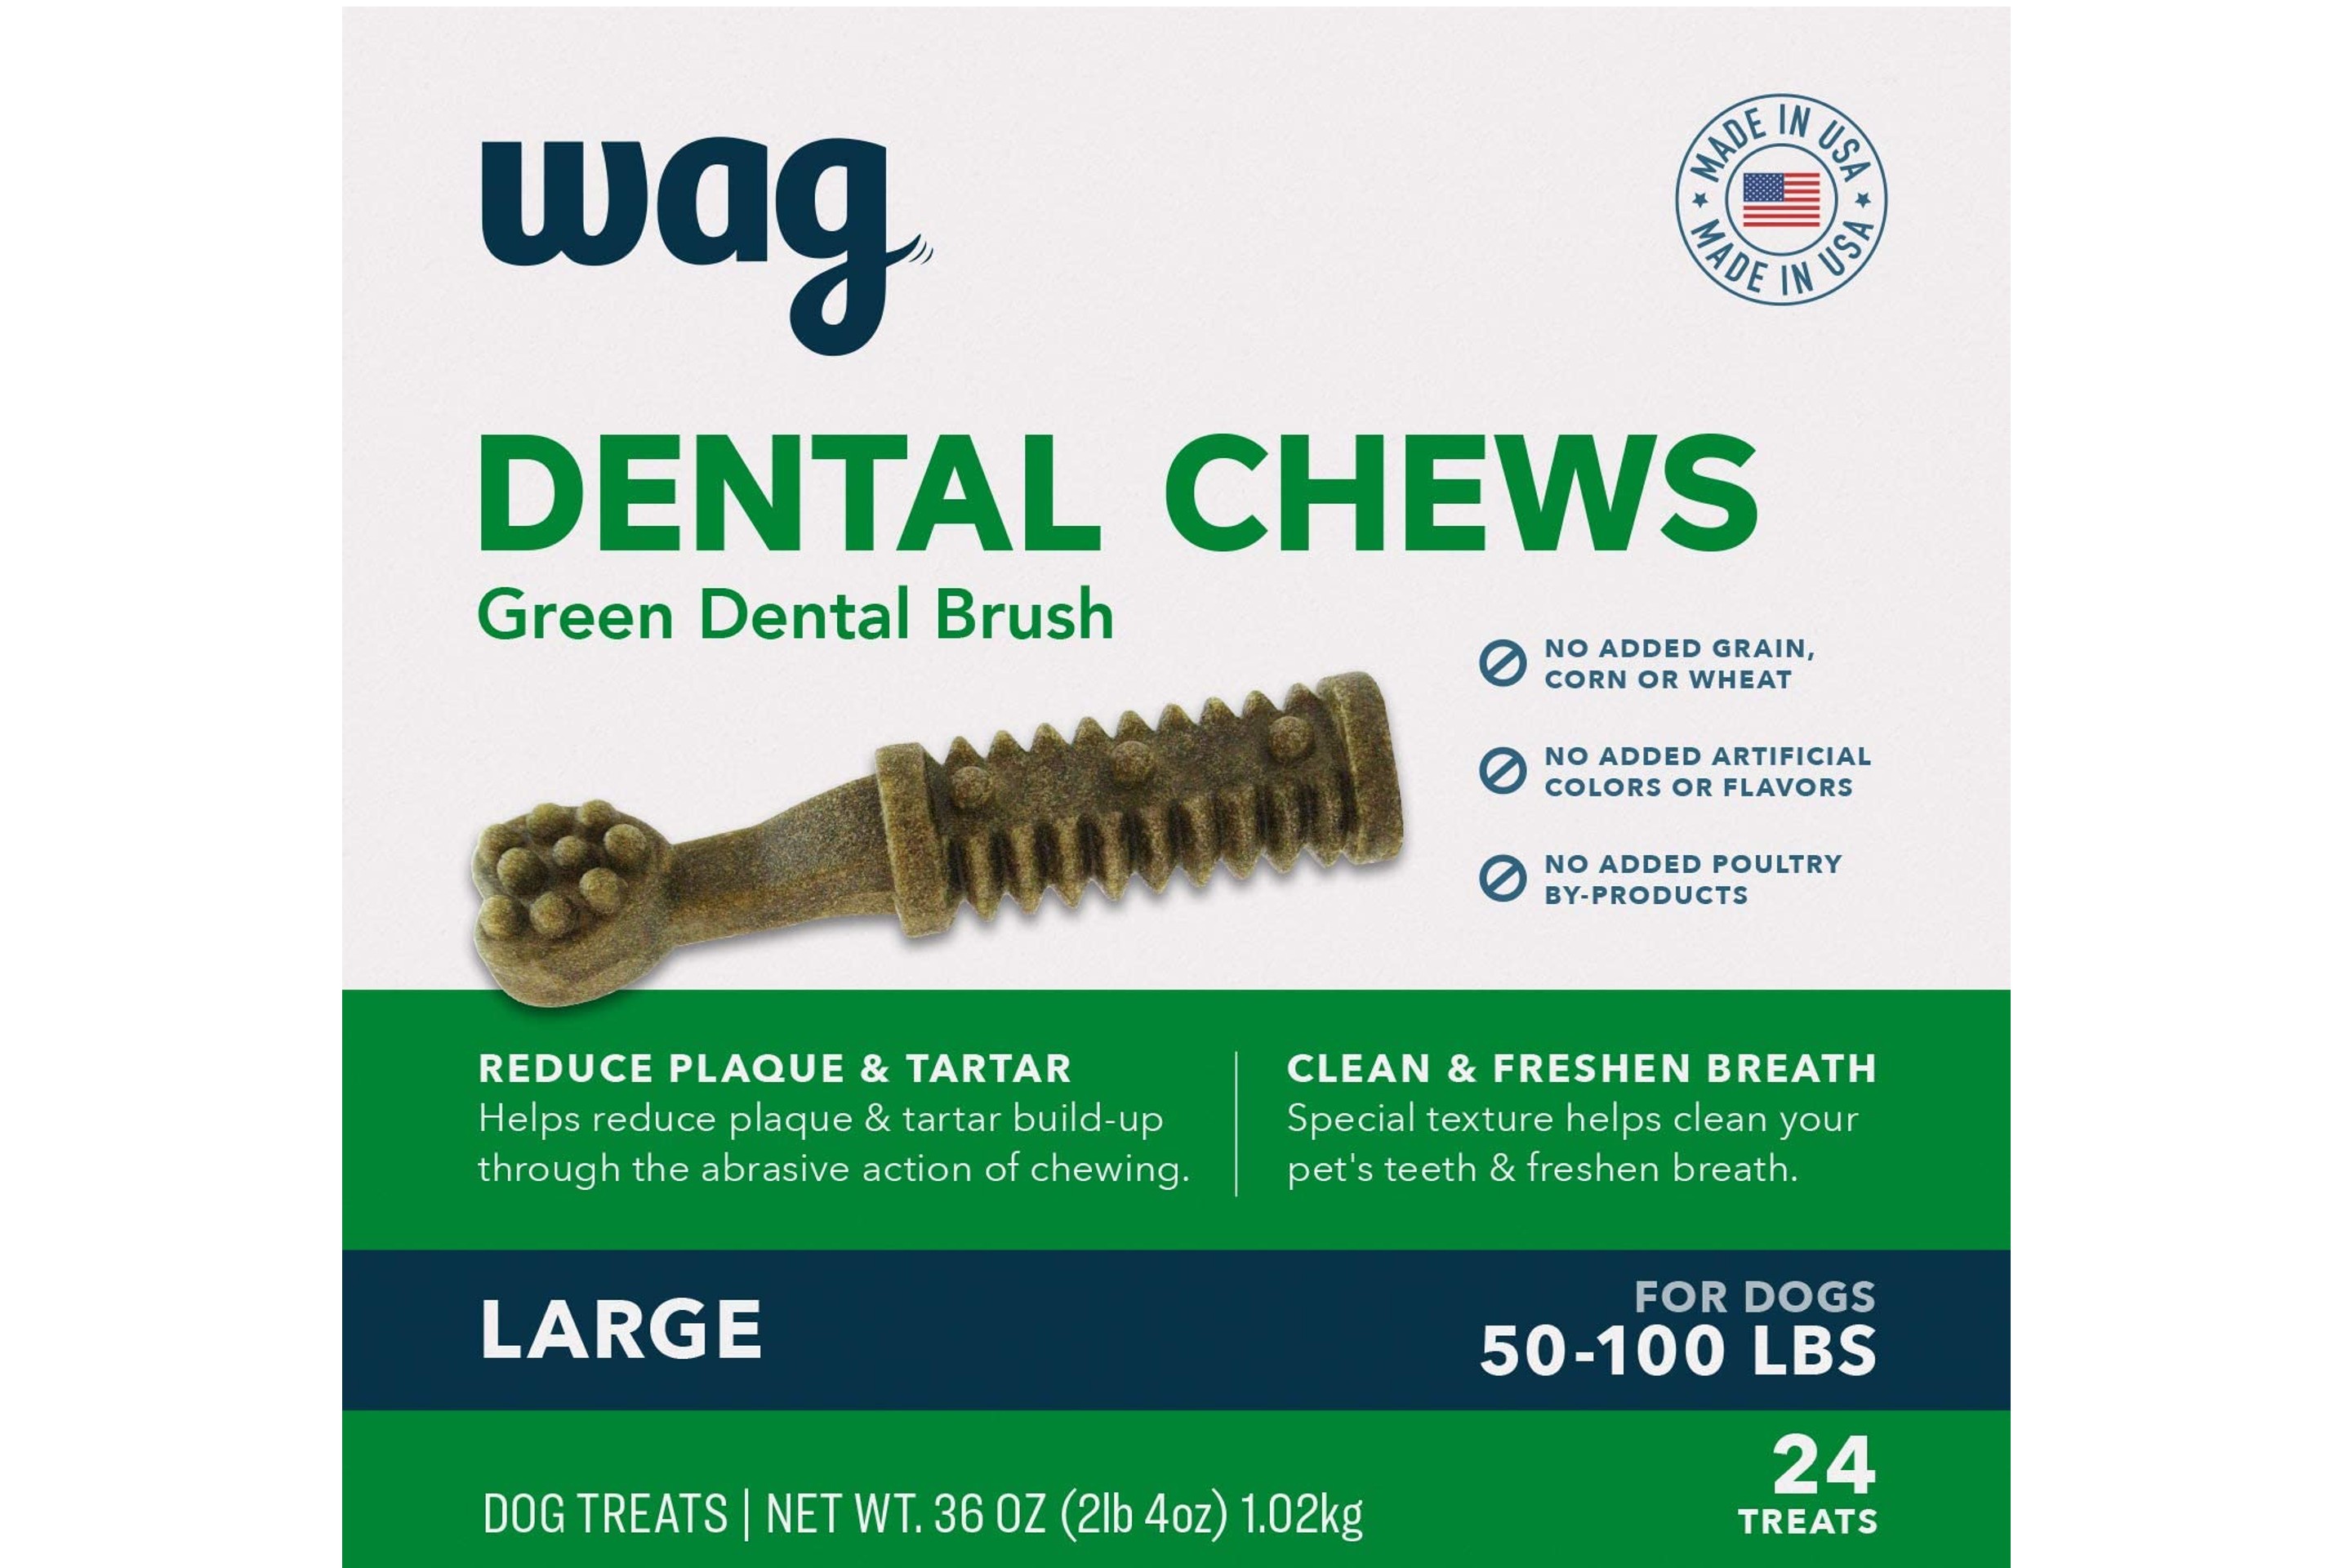 Wag Green Dental Brush Chews for Dogs